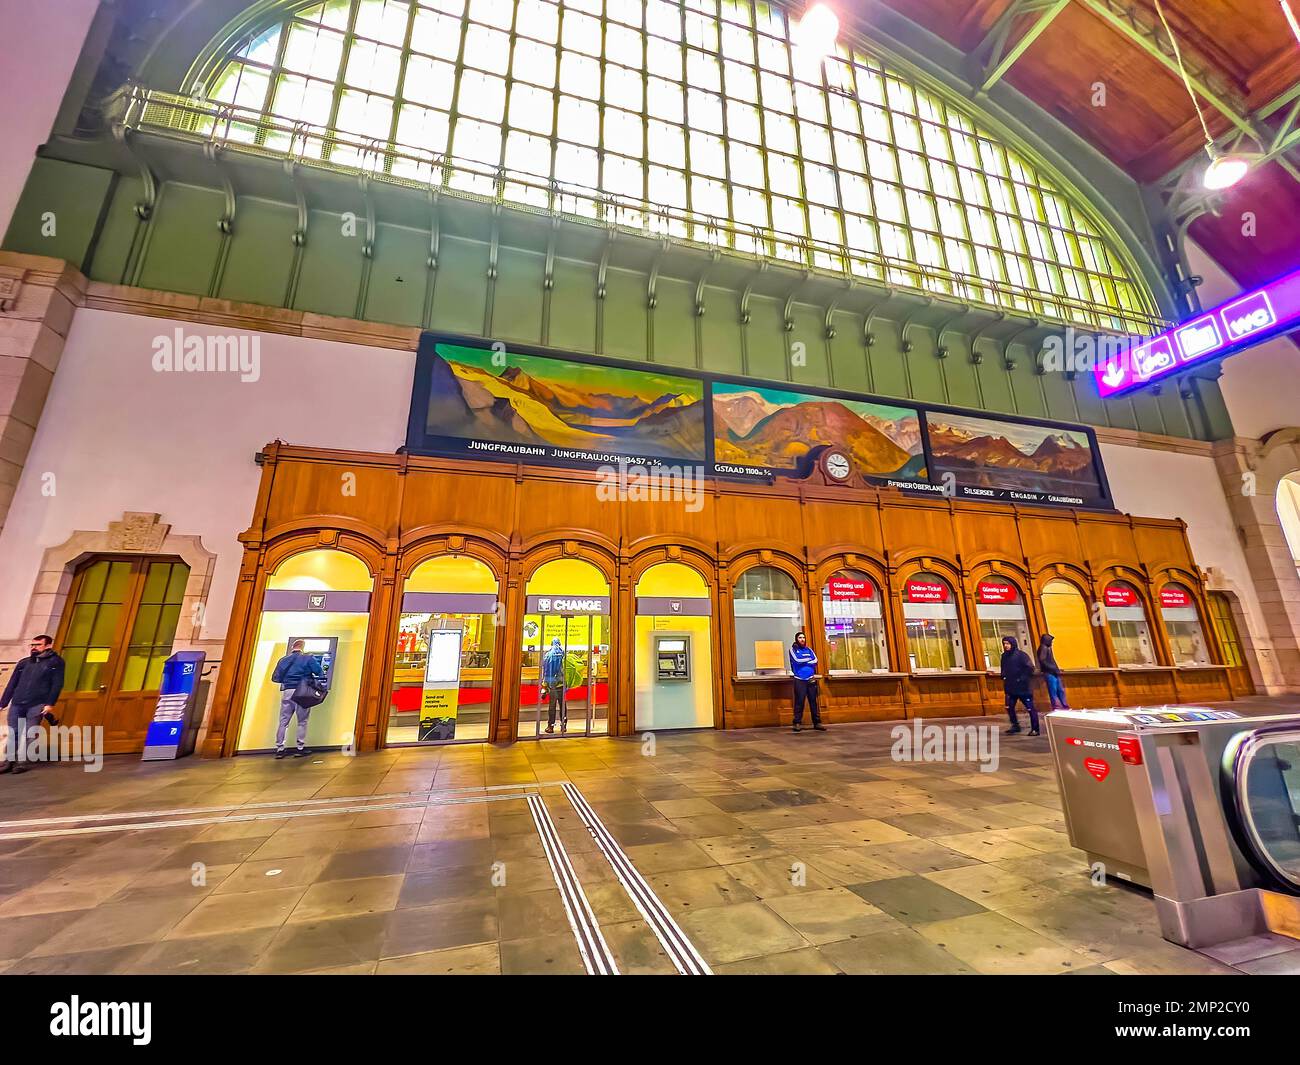 BASEL, SWITZERLAND - APRIL 1, 2022: The interior of Basel SBB railway station with large window and paintings on the wall, on April 1 in Basel, Switze Stock Photo